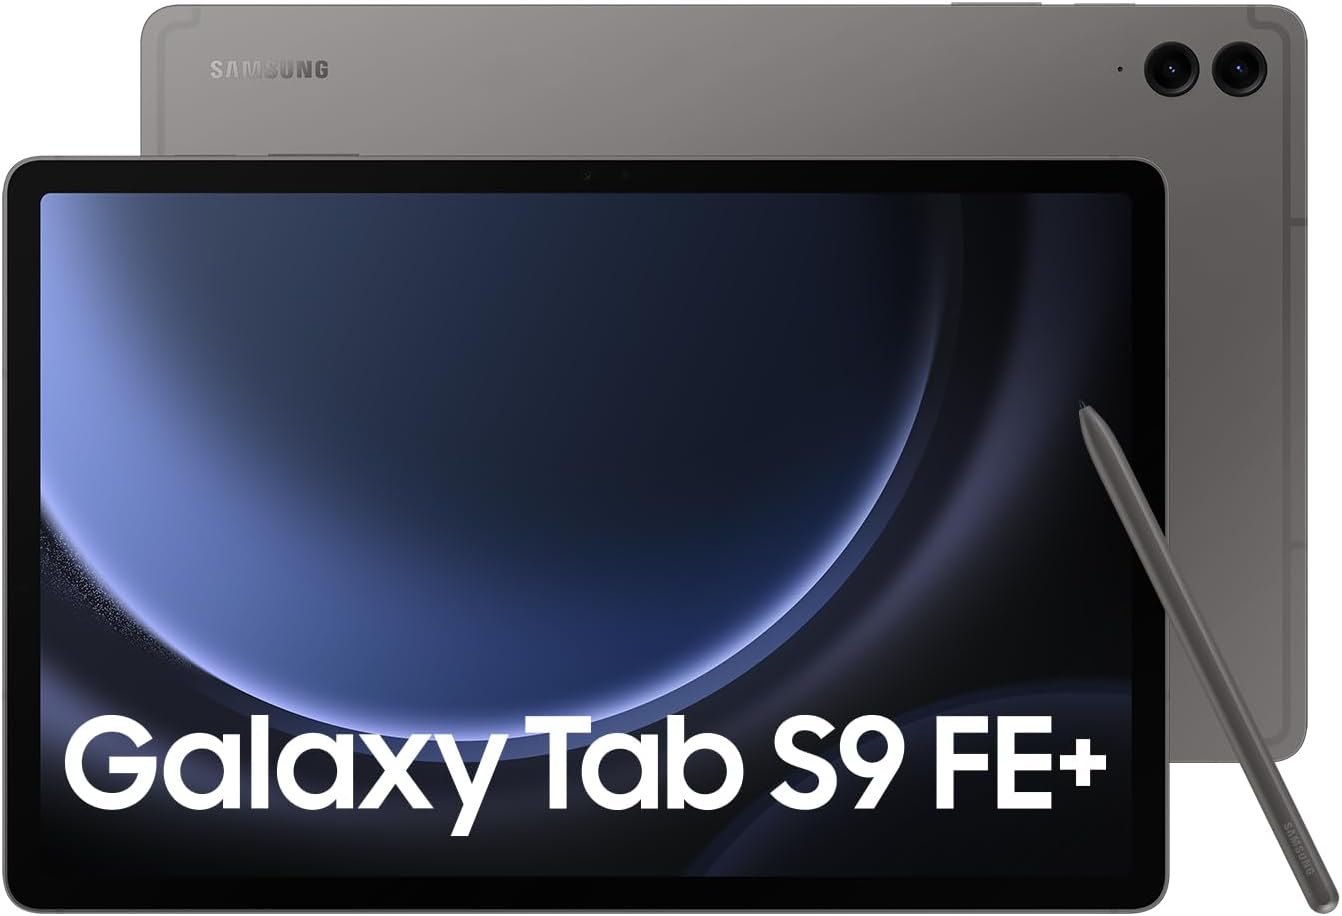 Samsung Galaxy Tab S9 FE+ 5G Android Tablet in Gray - Colorful design for fun creative possibilities and entertainment. 8806095170220